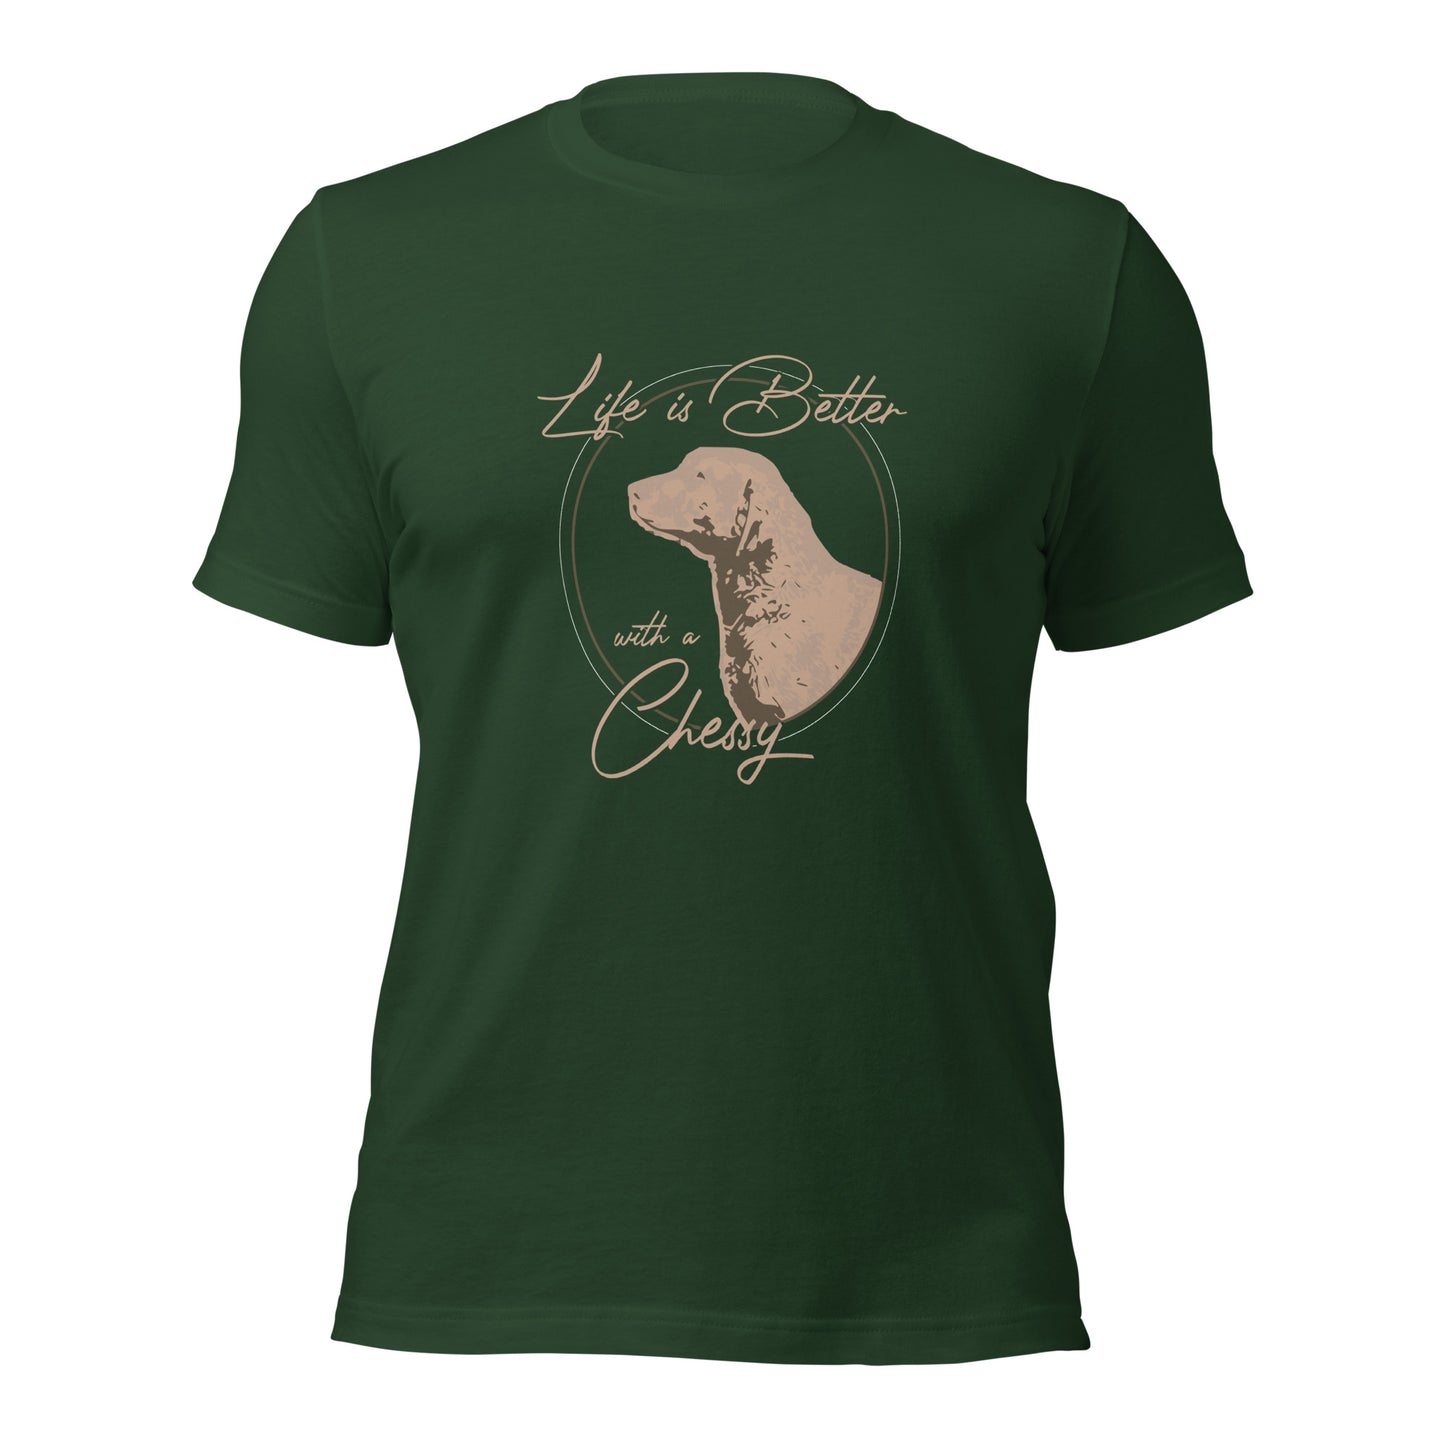 LIFE IS BETER WITH A CHESSY Unisex t-shirt